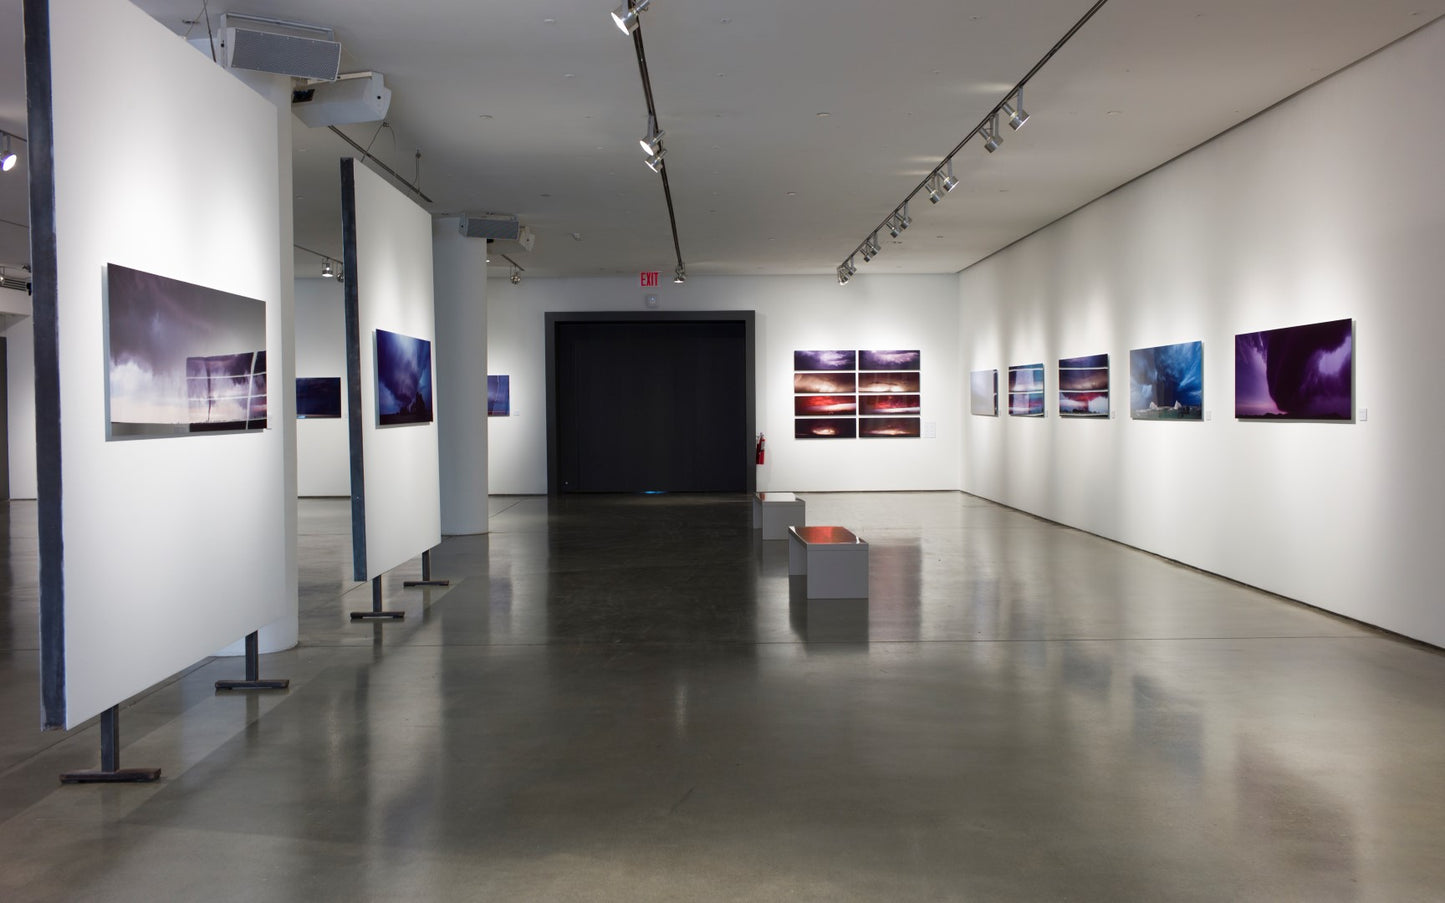 overview of a gallery exhibition of pictures of thunderstorms and supercells